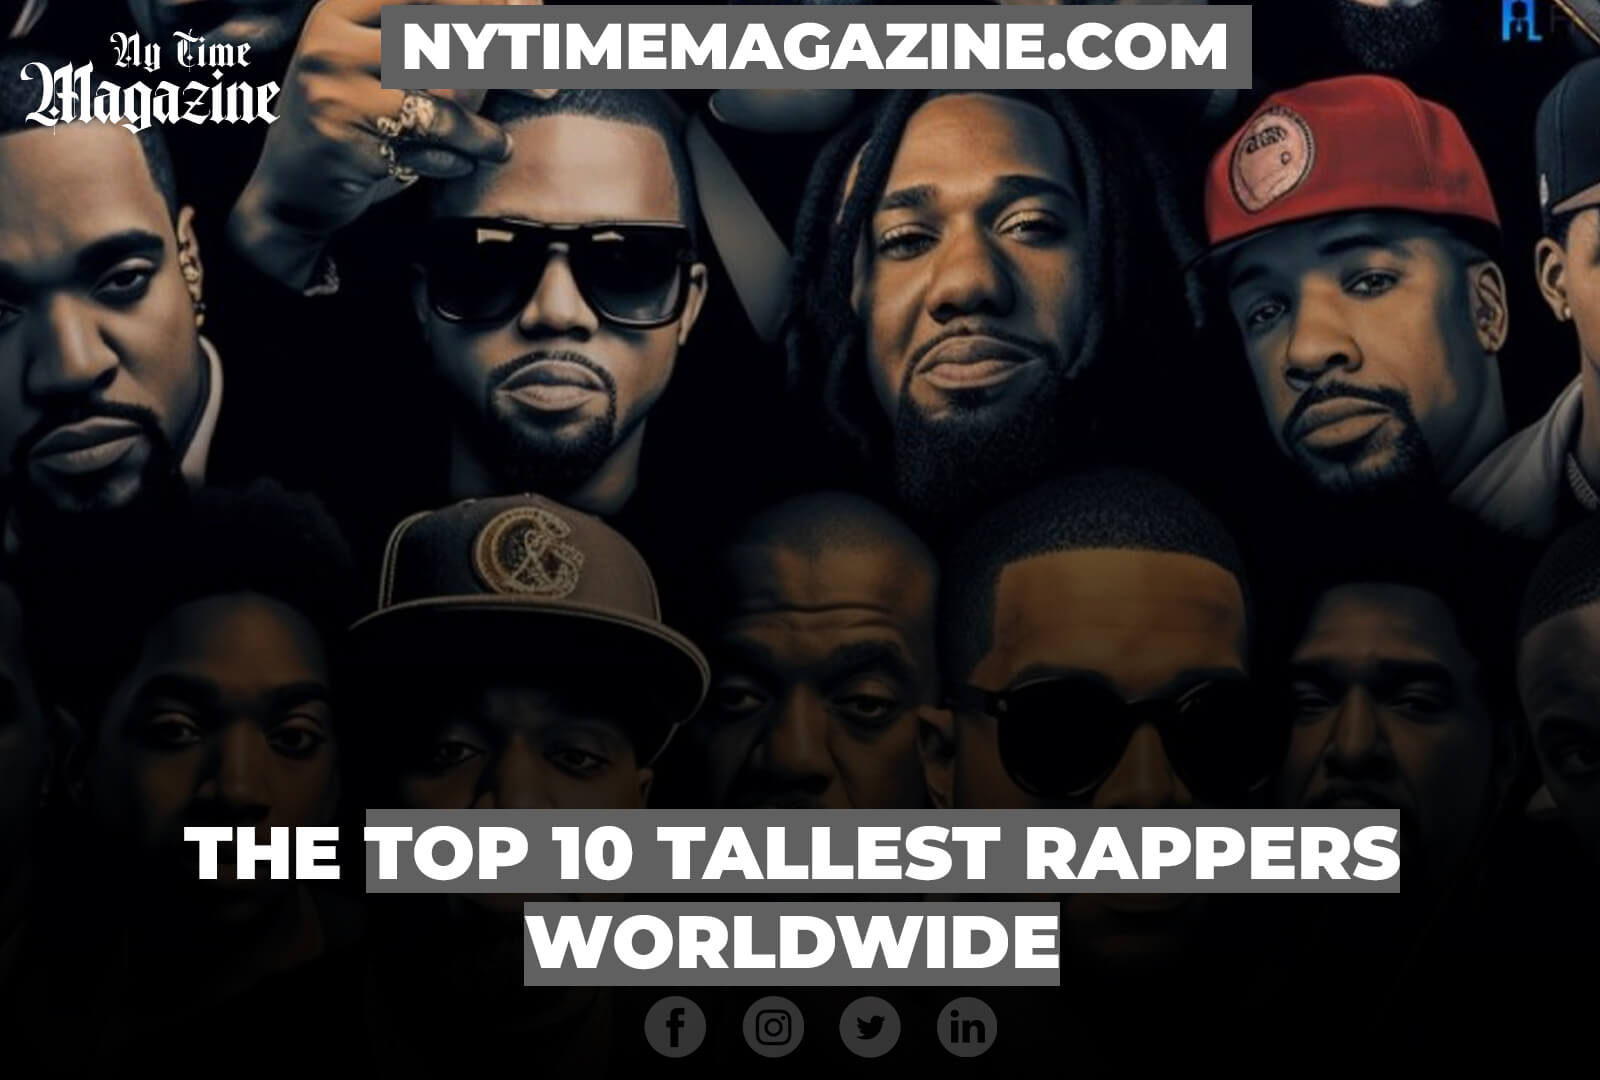 THE TOP 10 TALLEST RAPPERS WORLDWIDE